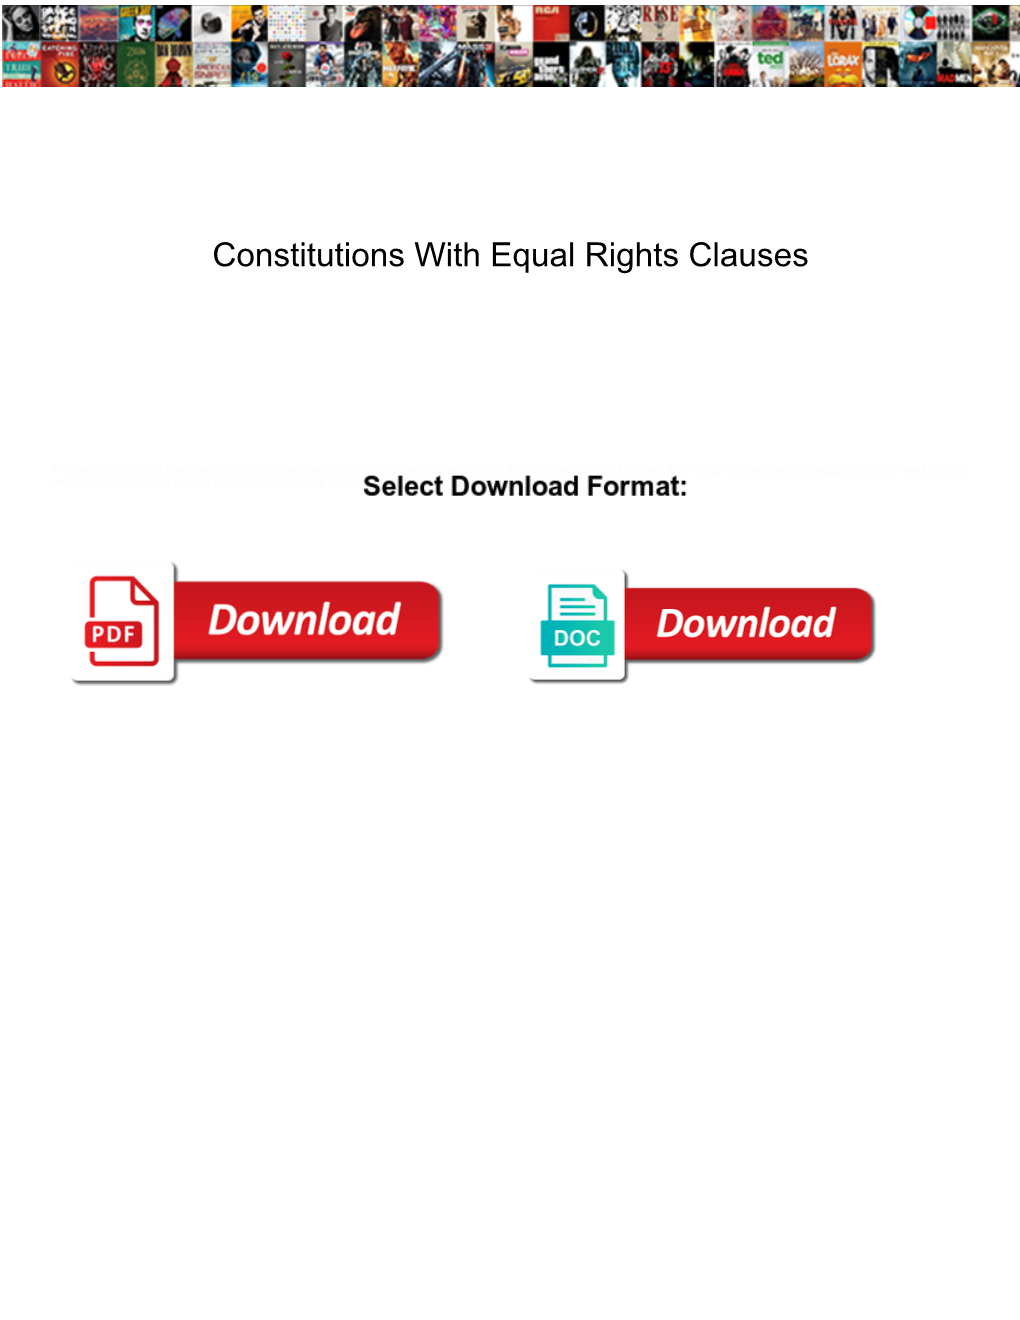 Constitutions with Equal Rights Clauses